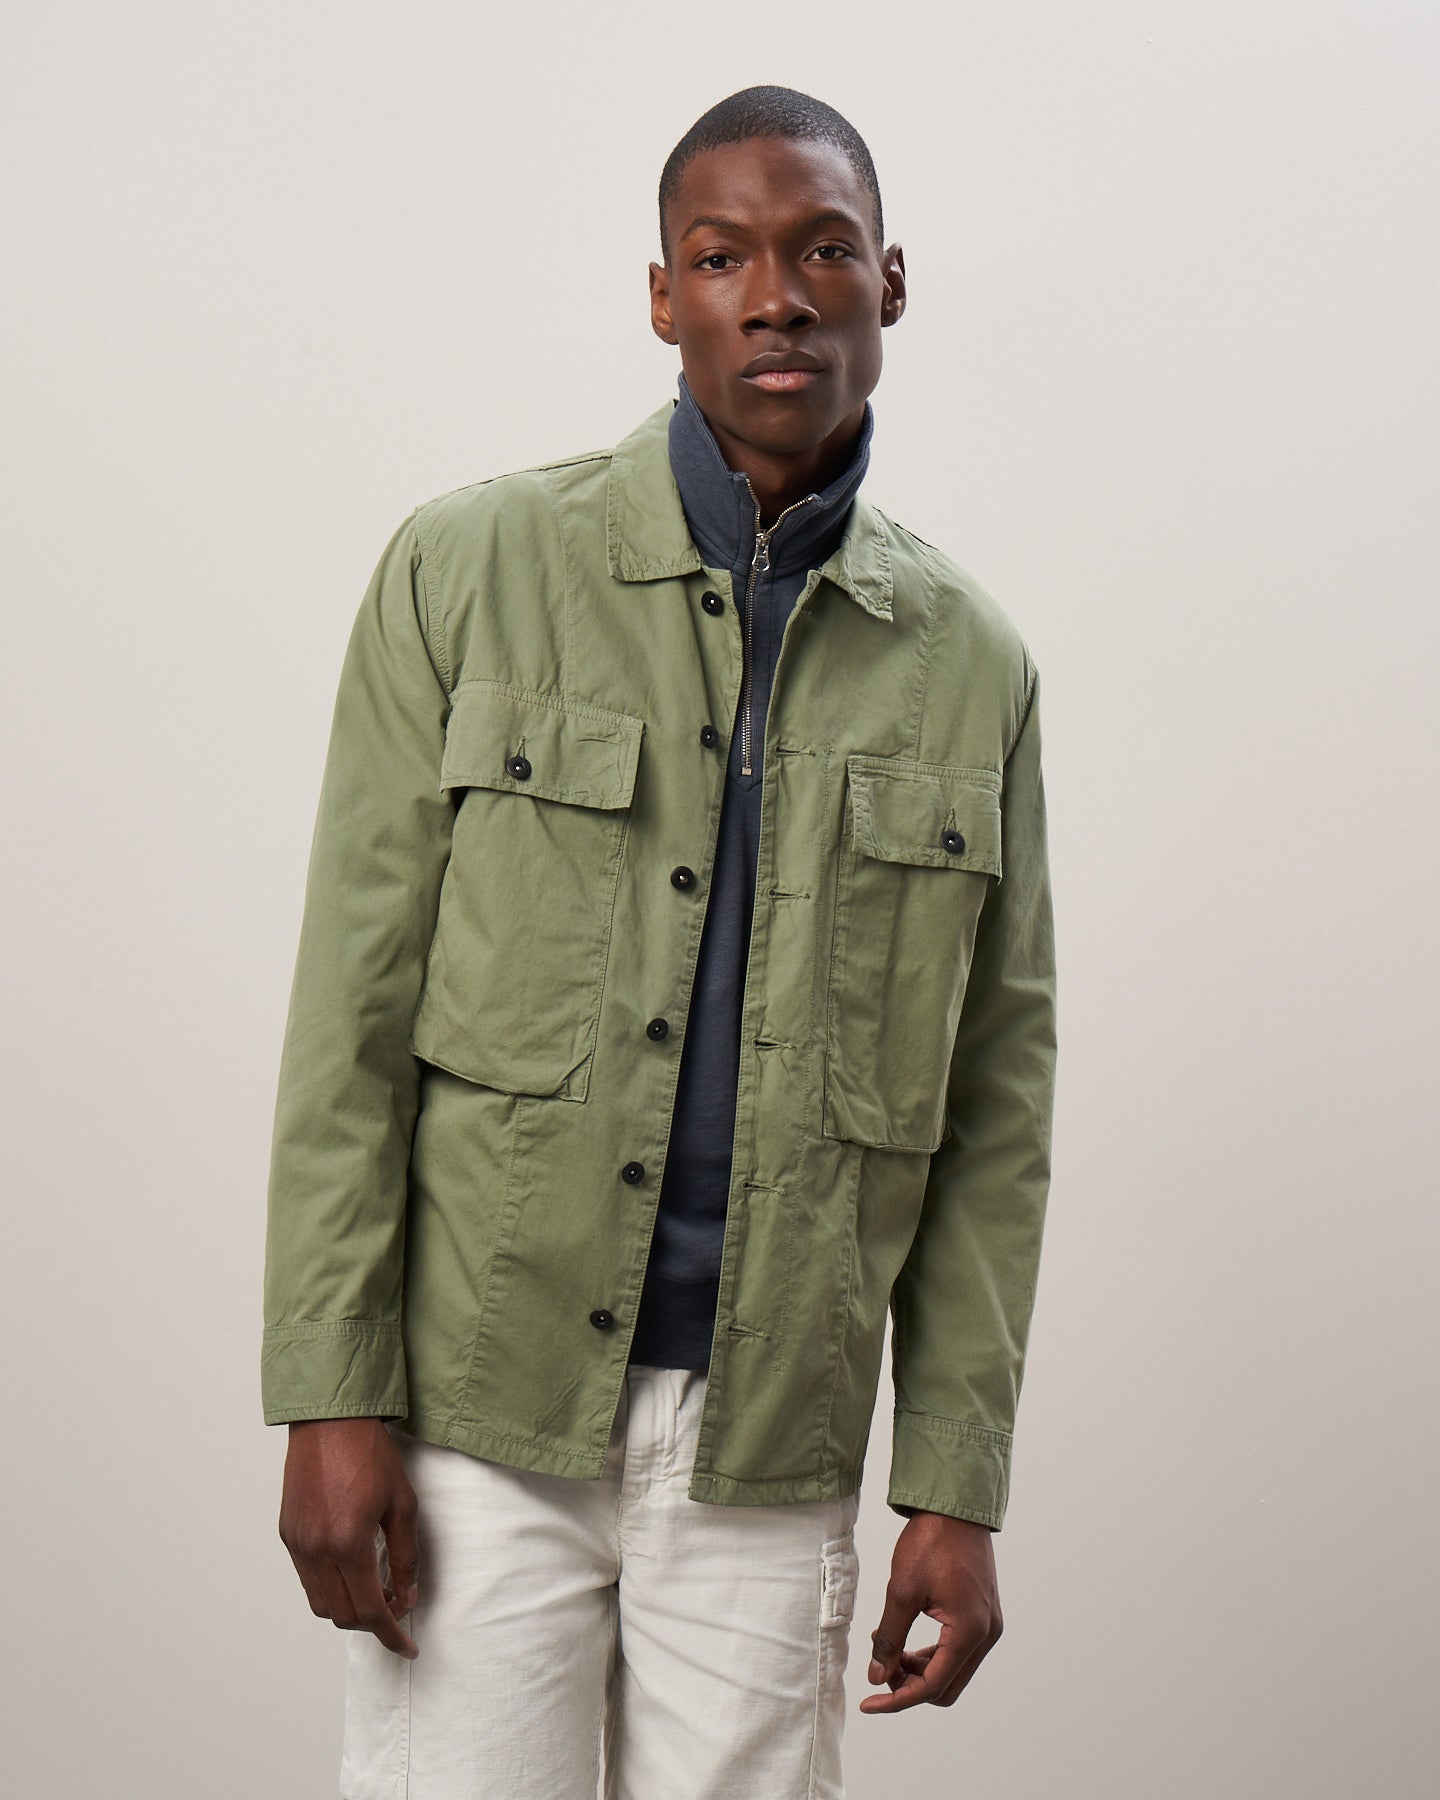 Veste Homme chino Vert militaire Darby BBE2121-02